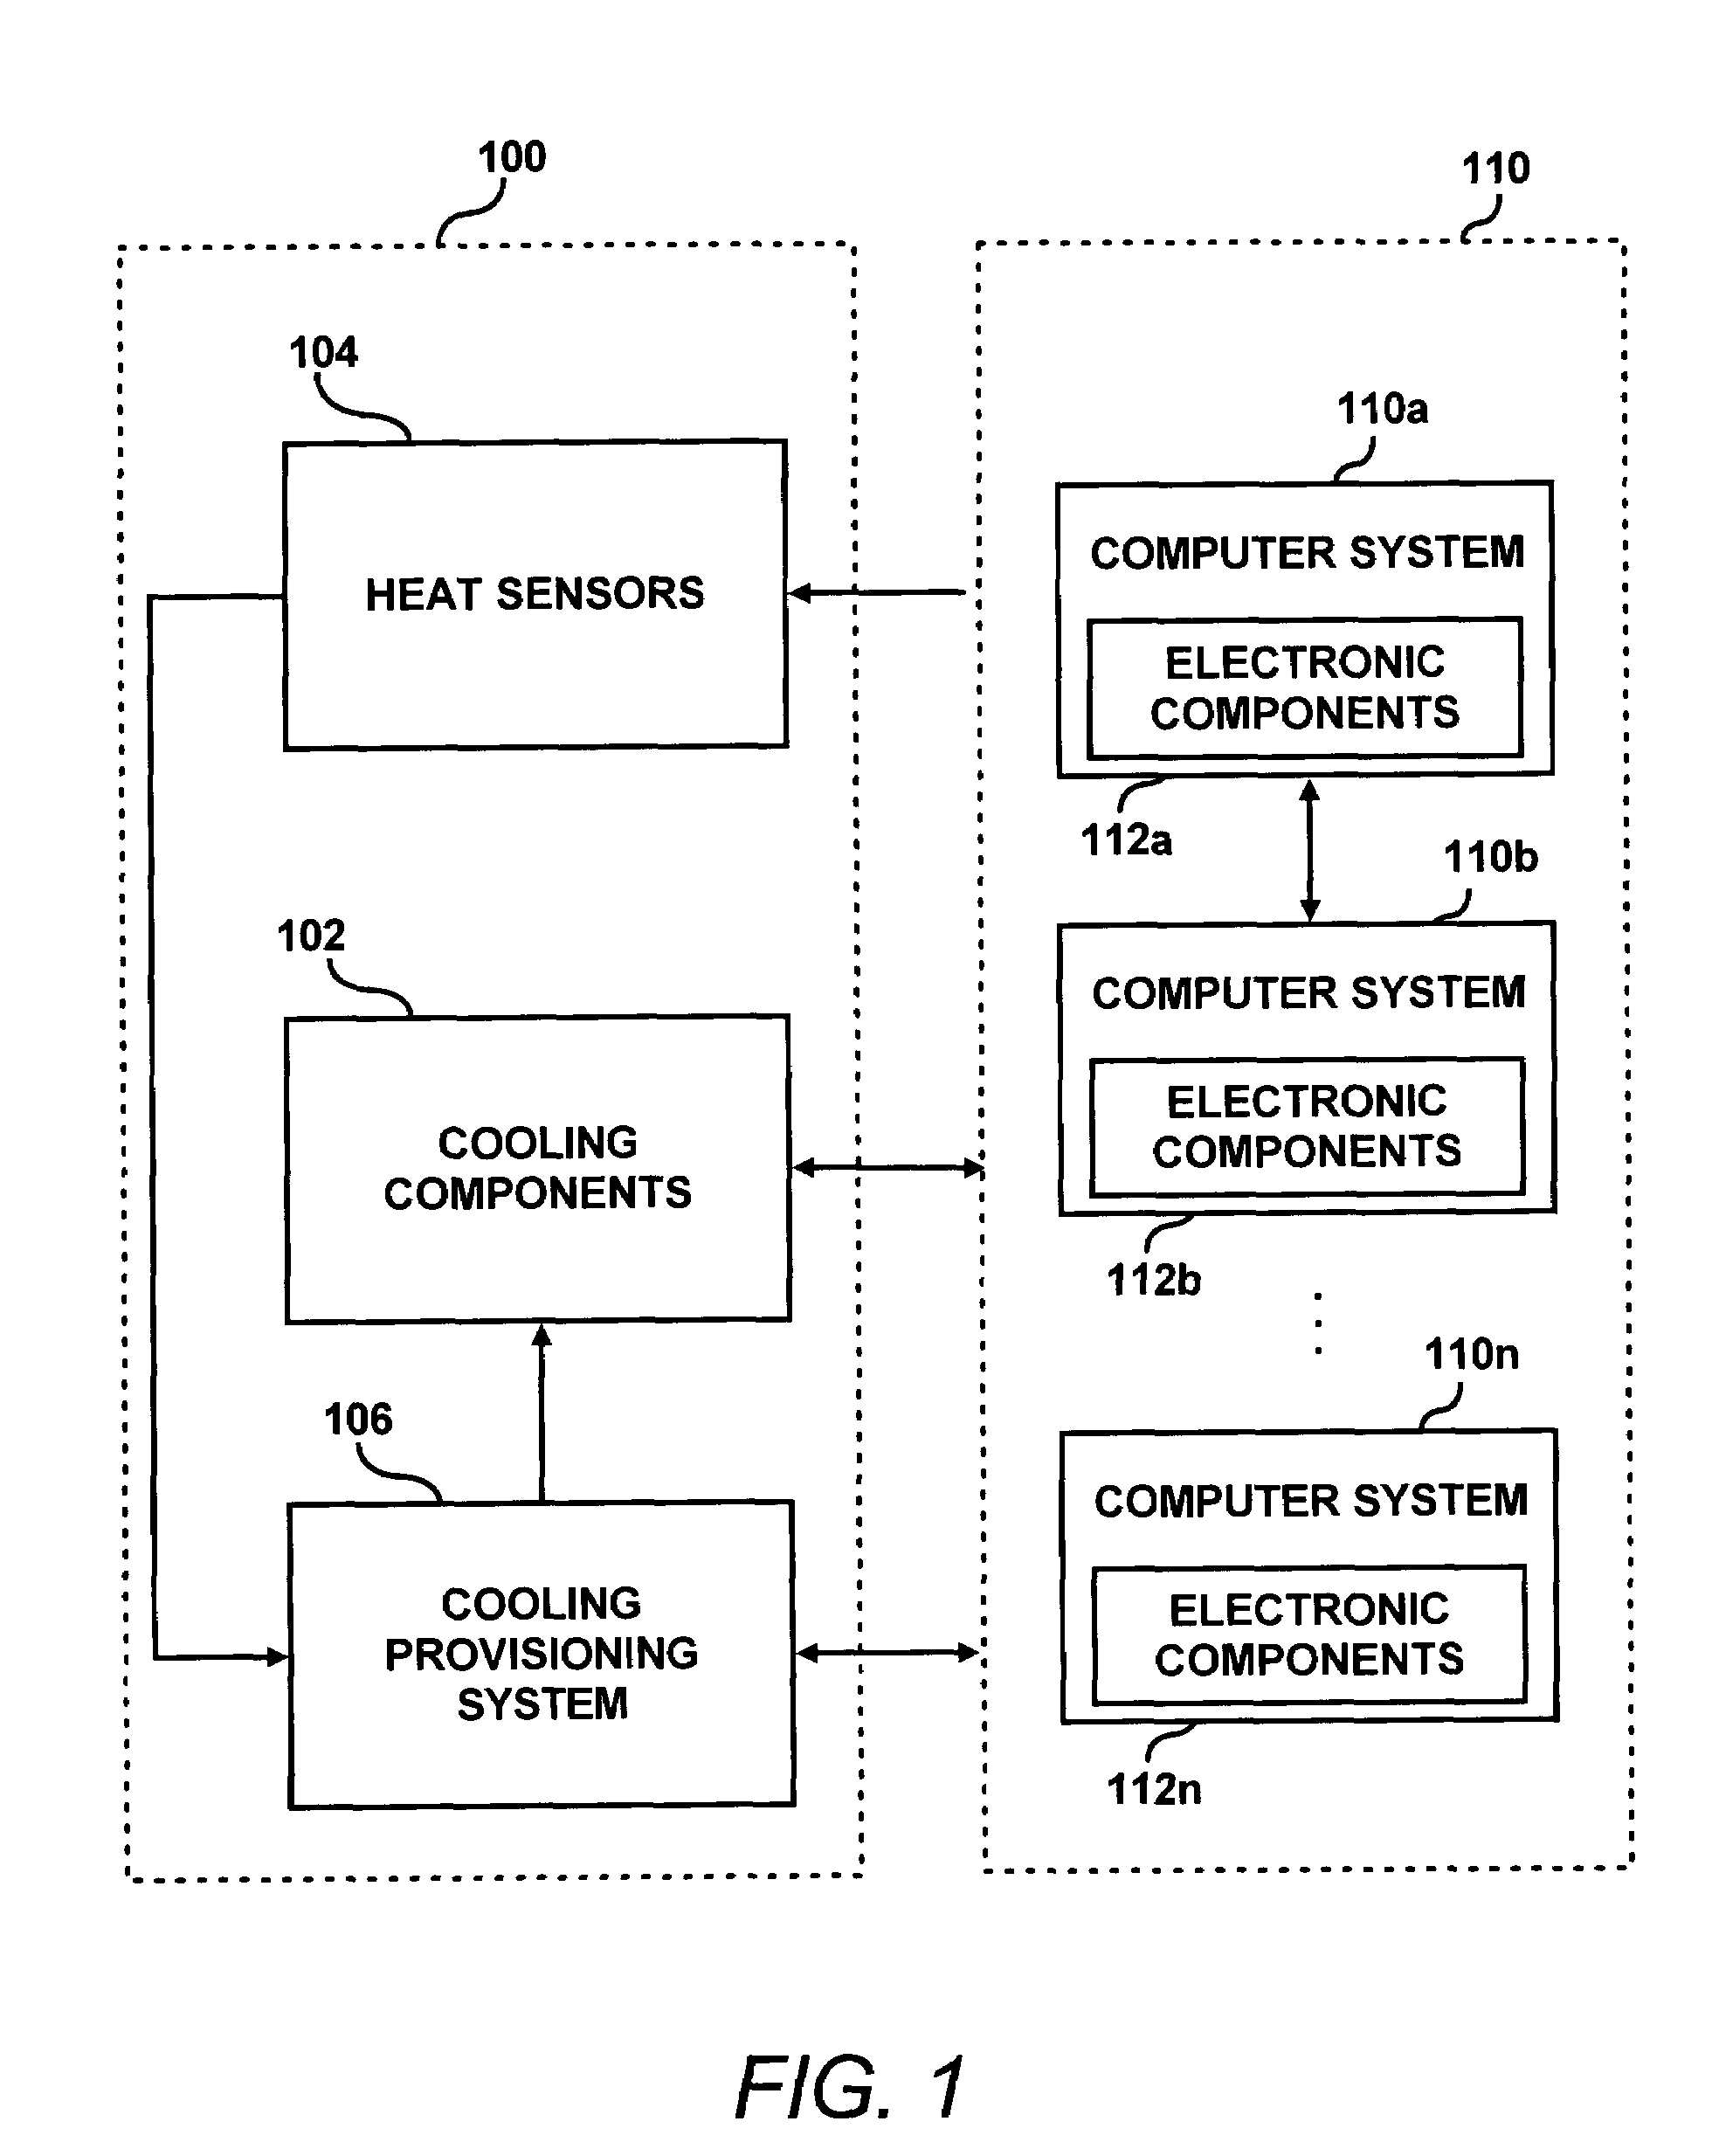 Cooling system for computer systems